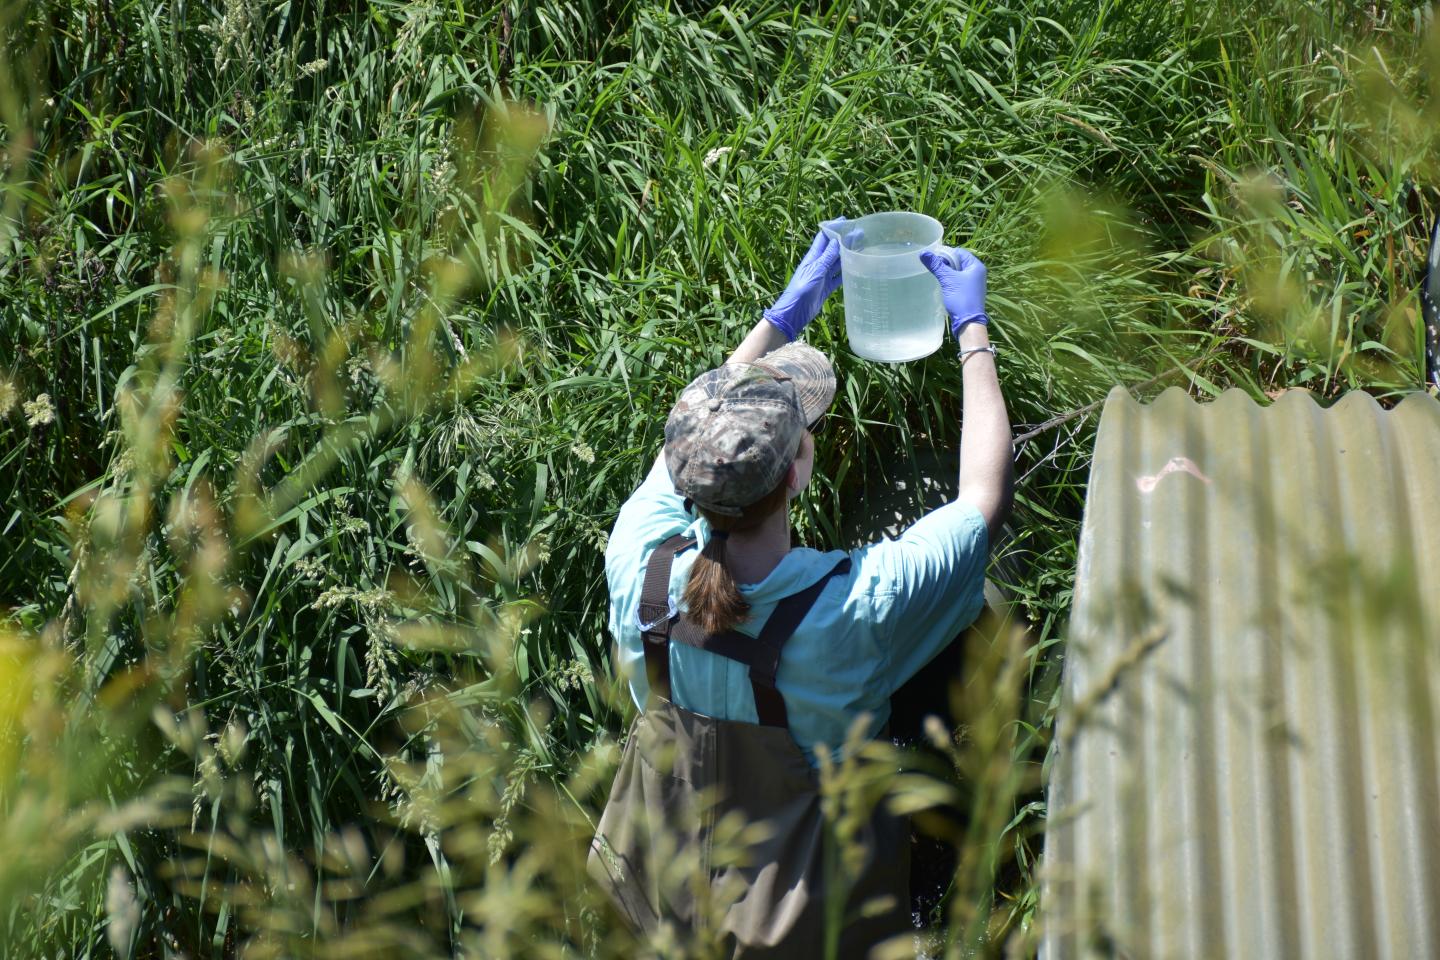 University of Notre Dame grad student, Shannon Speir, takes water samples at a tile drain site.